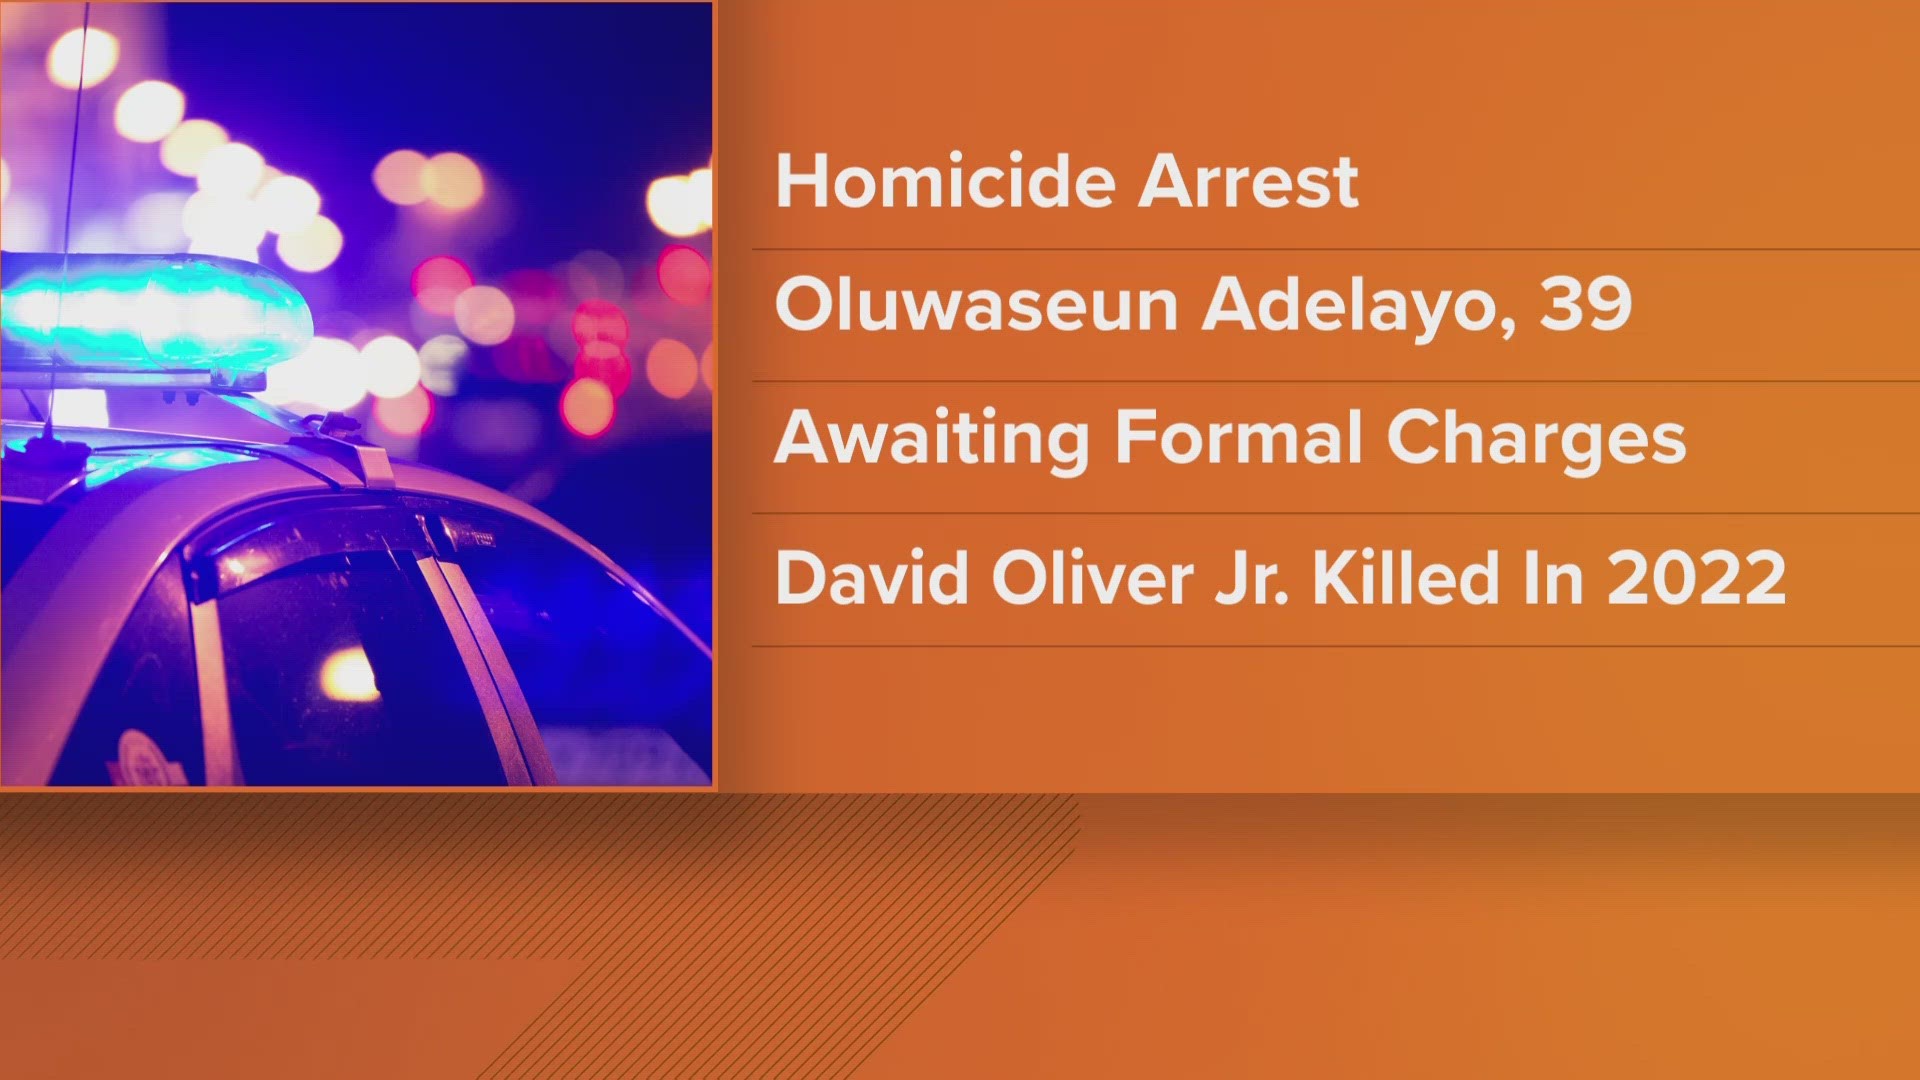 David Oliver Jr. was found with injuries consistent with trauma inside an east side home on Feb. 22, 2022.